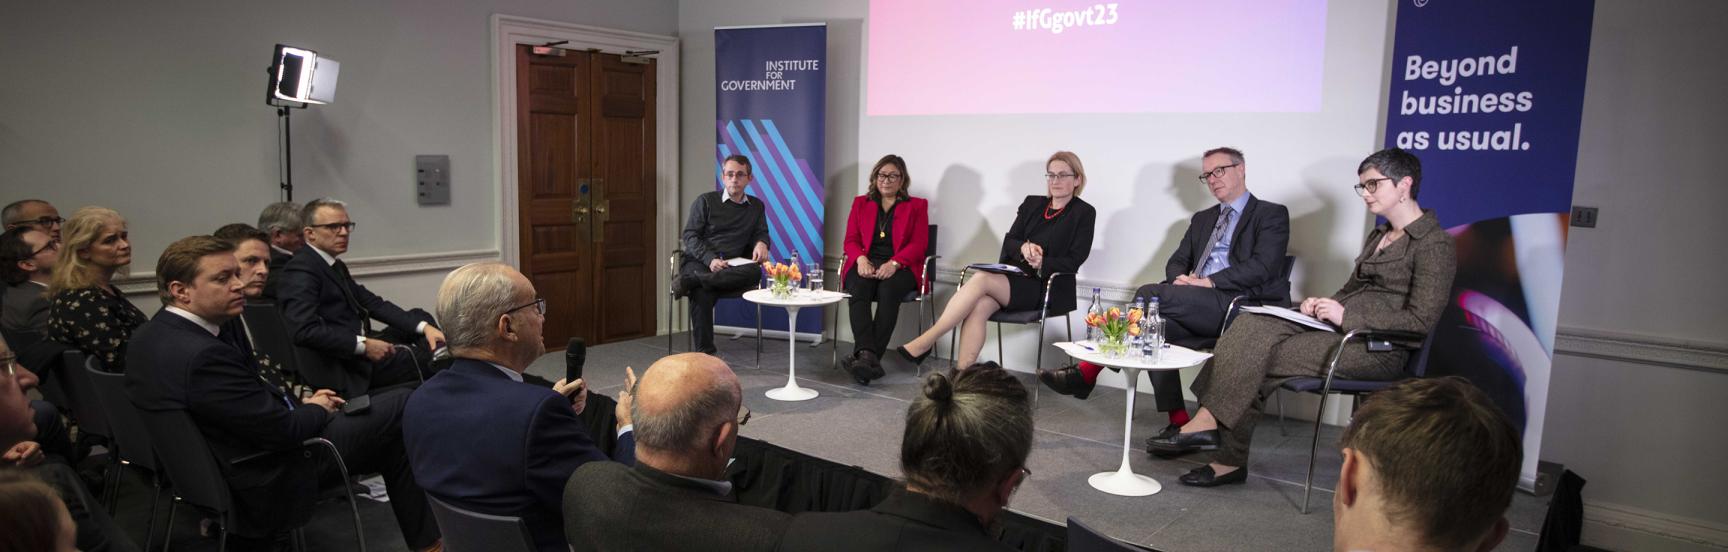 Panellists on stage at an event at the IfG Government 2023 conference, including Ayesha Hazarika, Paul Johnson and Chloe Smith MP while a member of the audience asks a question.